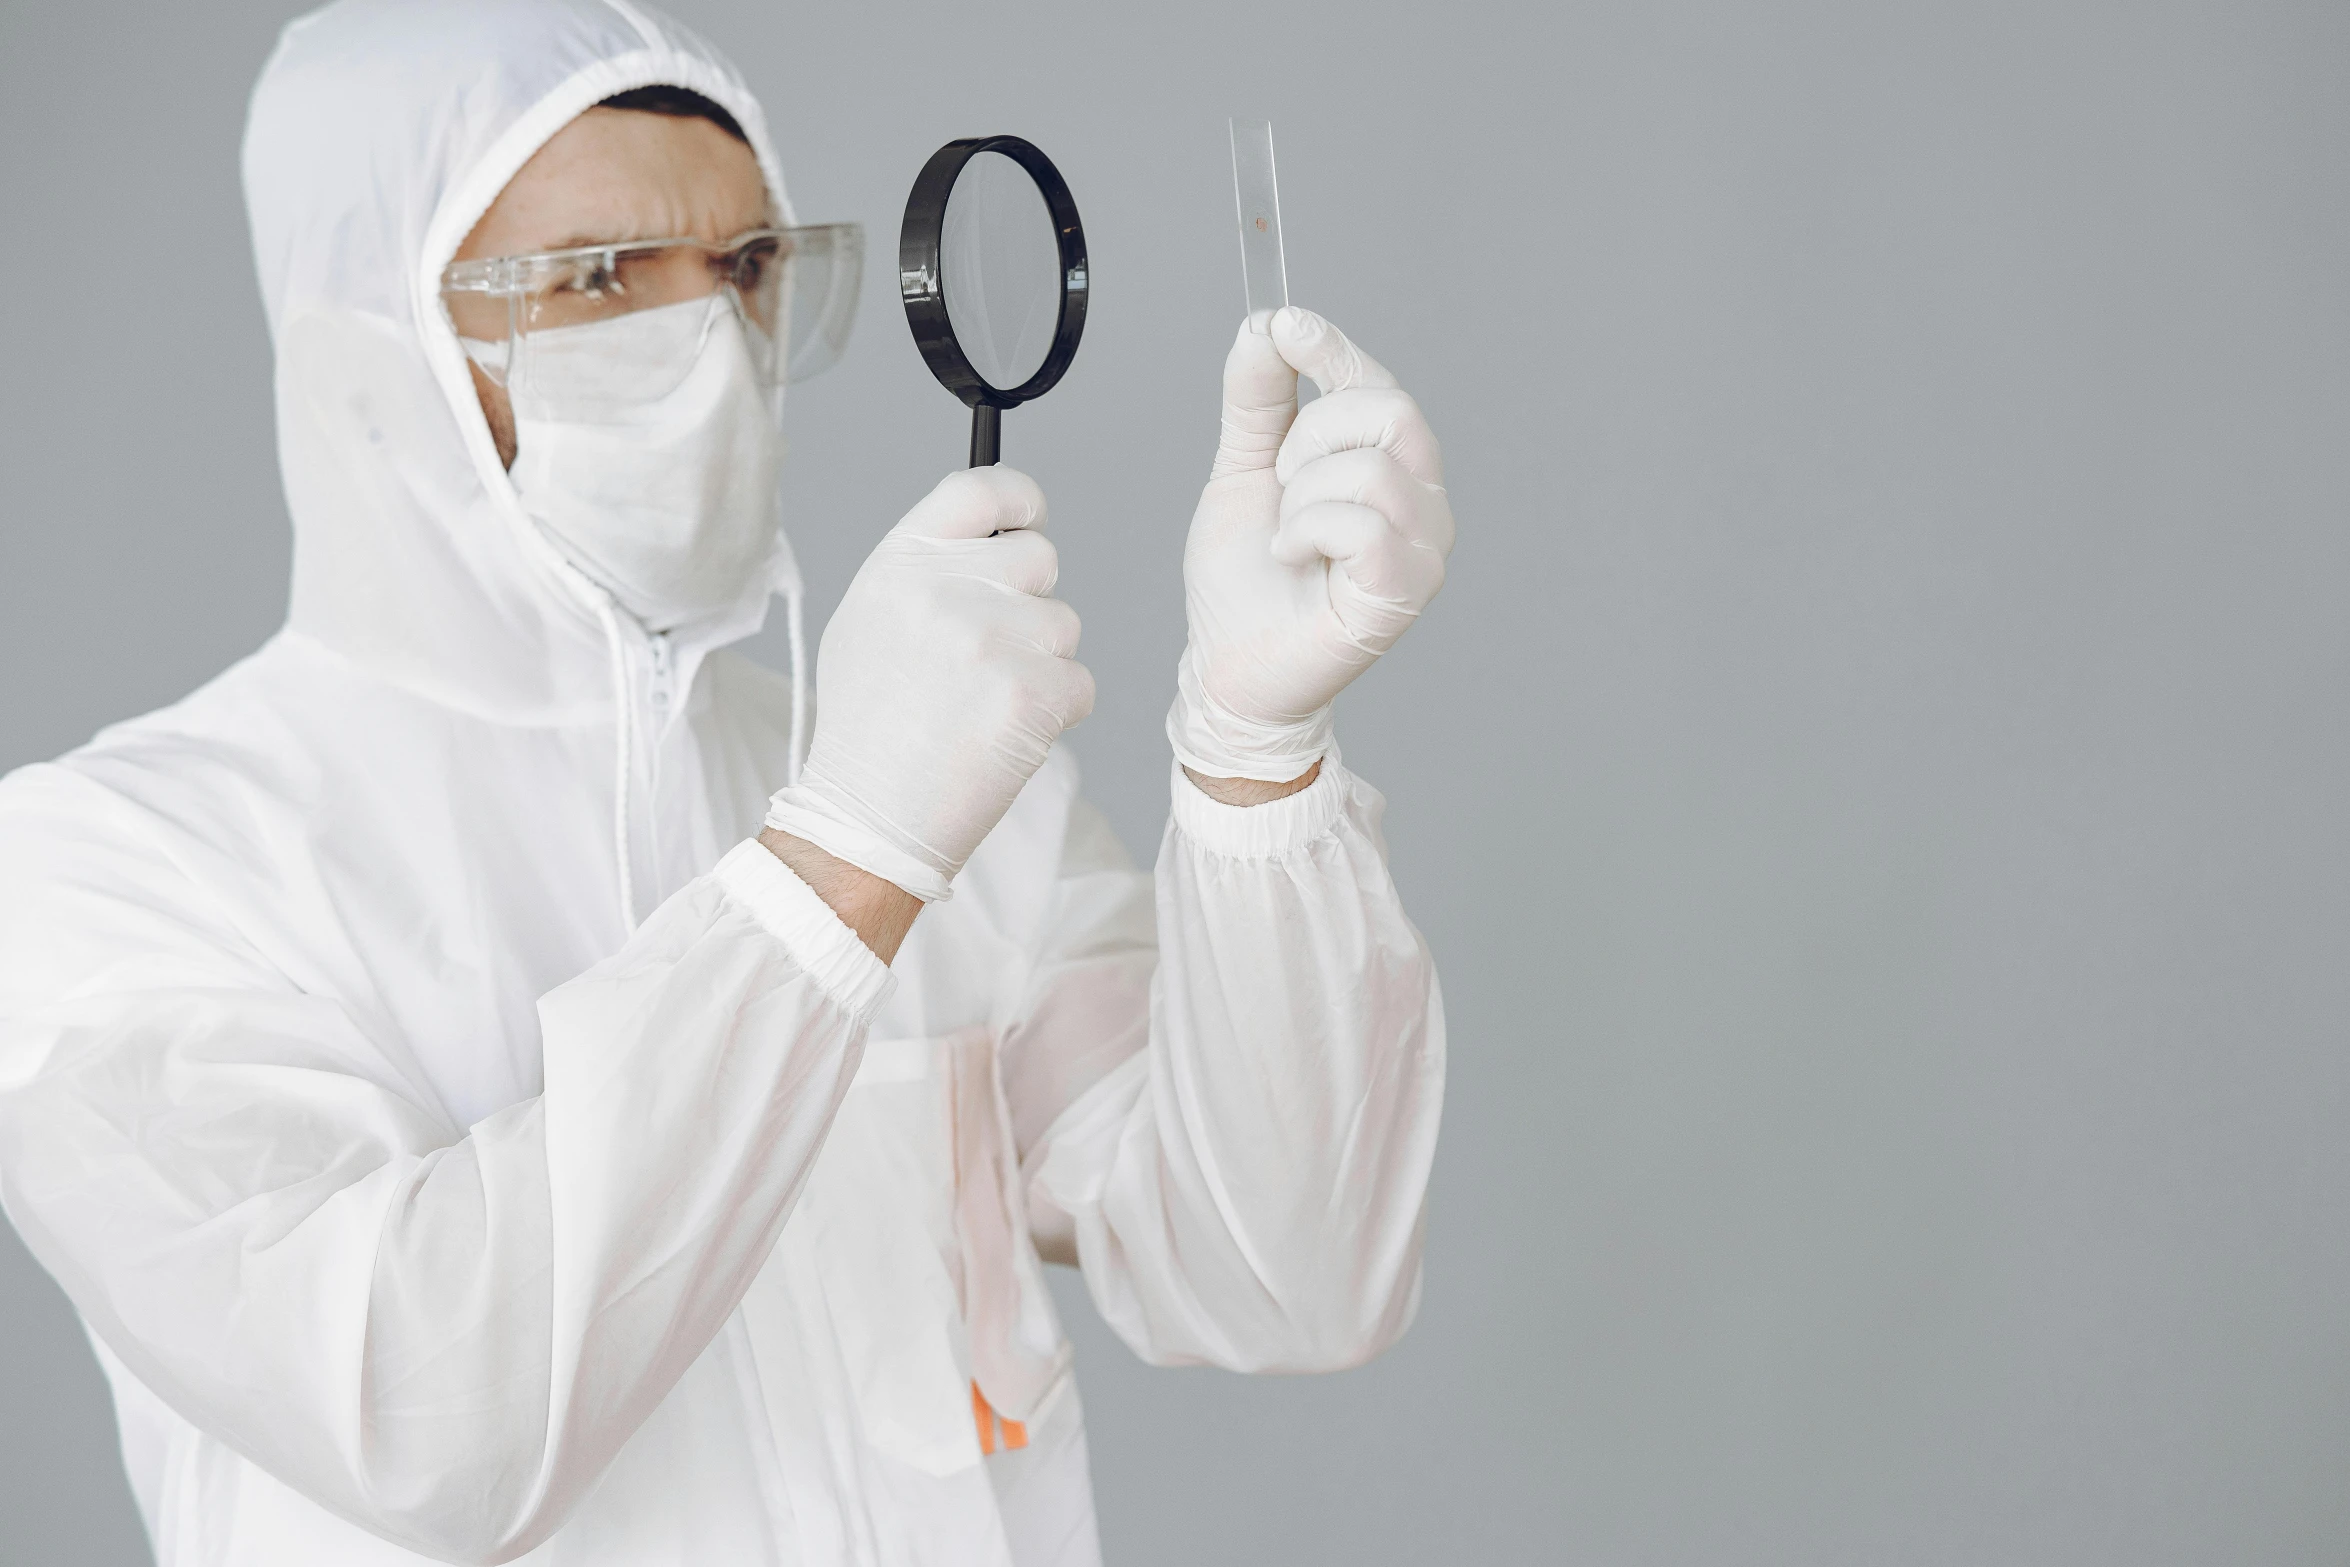 a man in a white lab coat holding a pair of scissors, pexels contest winner, analytical art, wearing translucent veils, graphene, dressed as a scavenger, white uniform